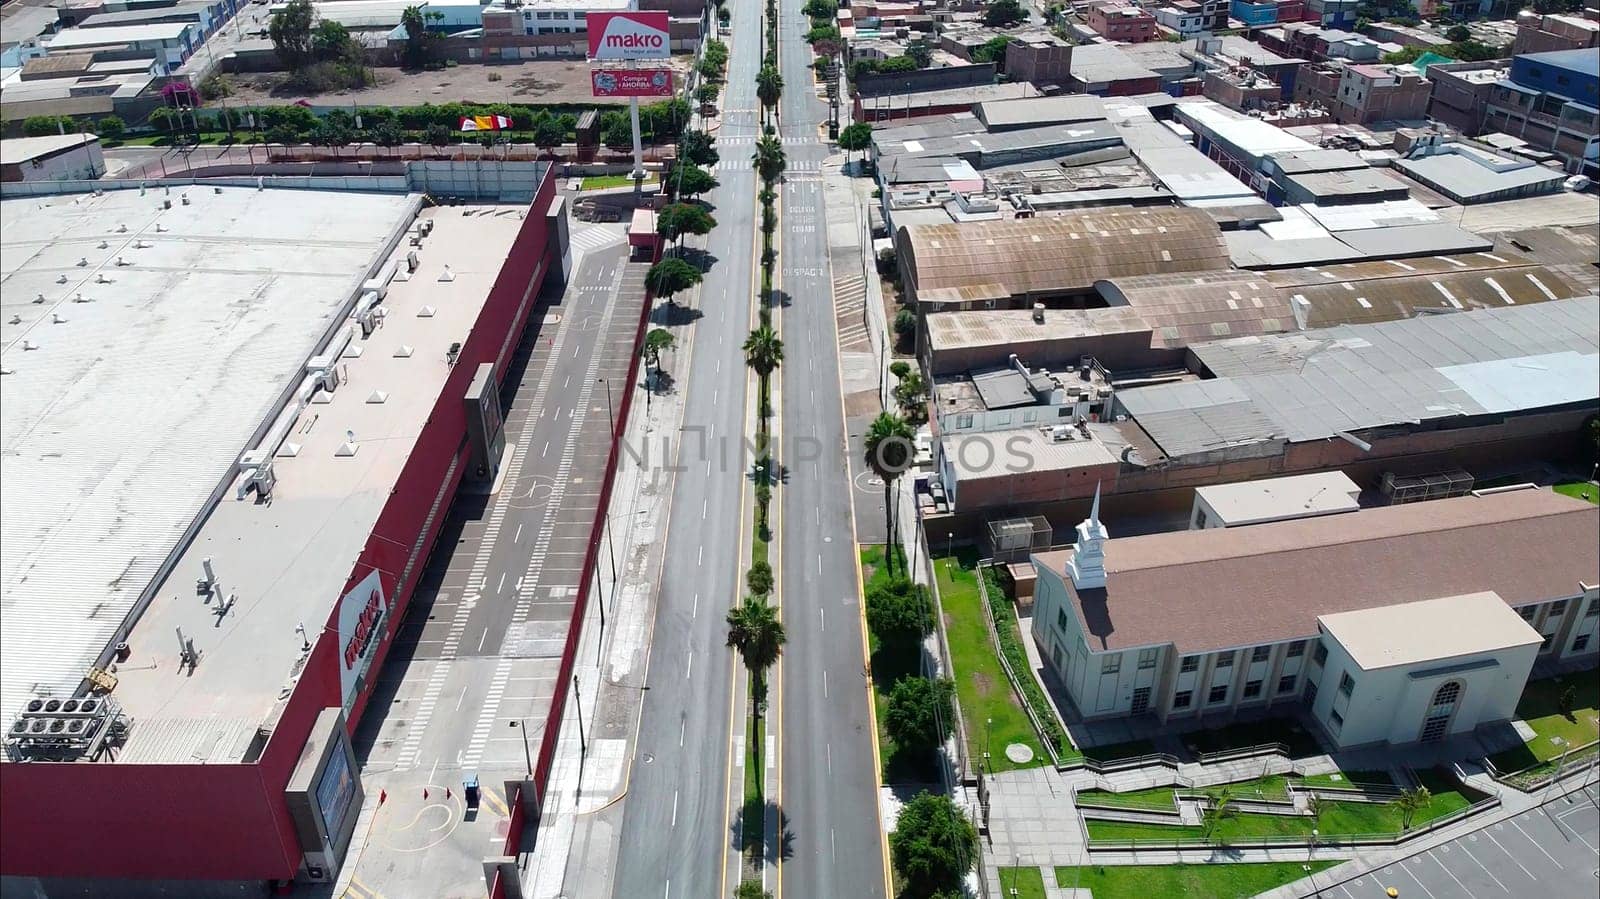 Surco district, in Lima Peru. During the lockdown for coronavirus. Empty streets, few public transportation. Aerial view